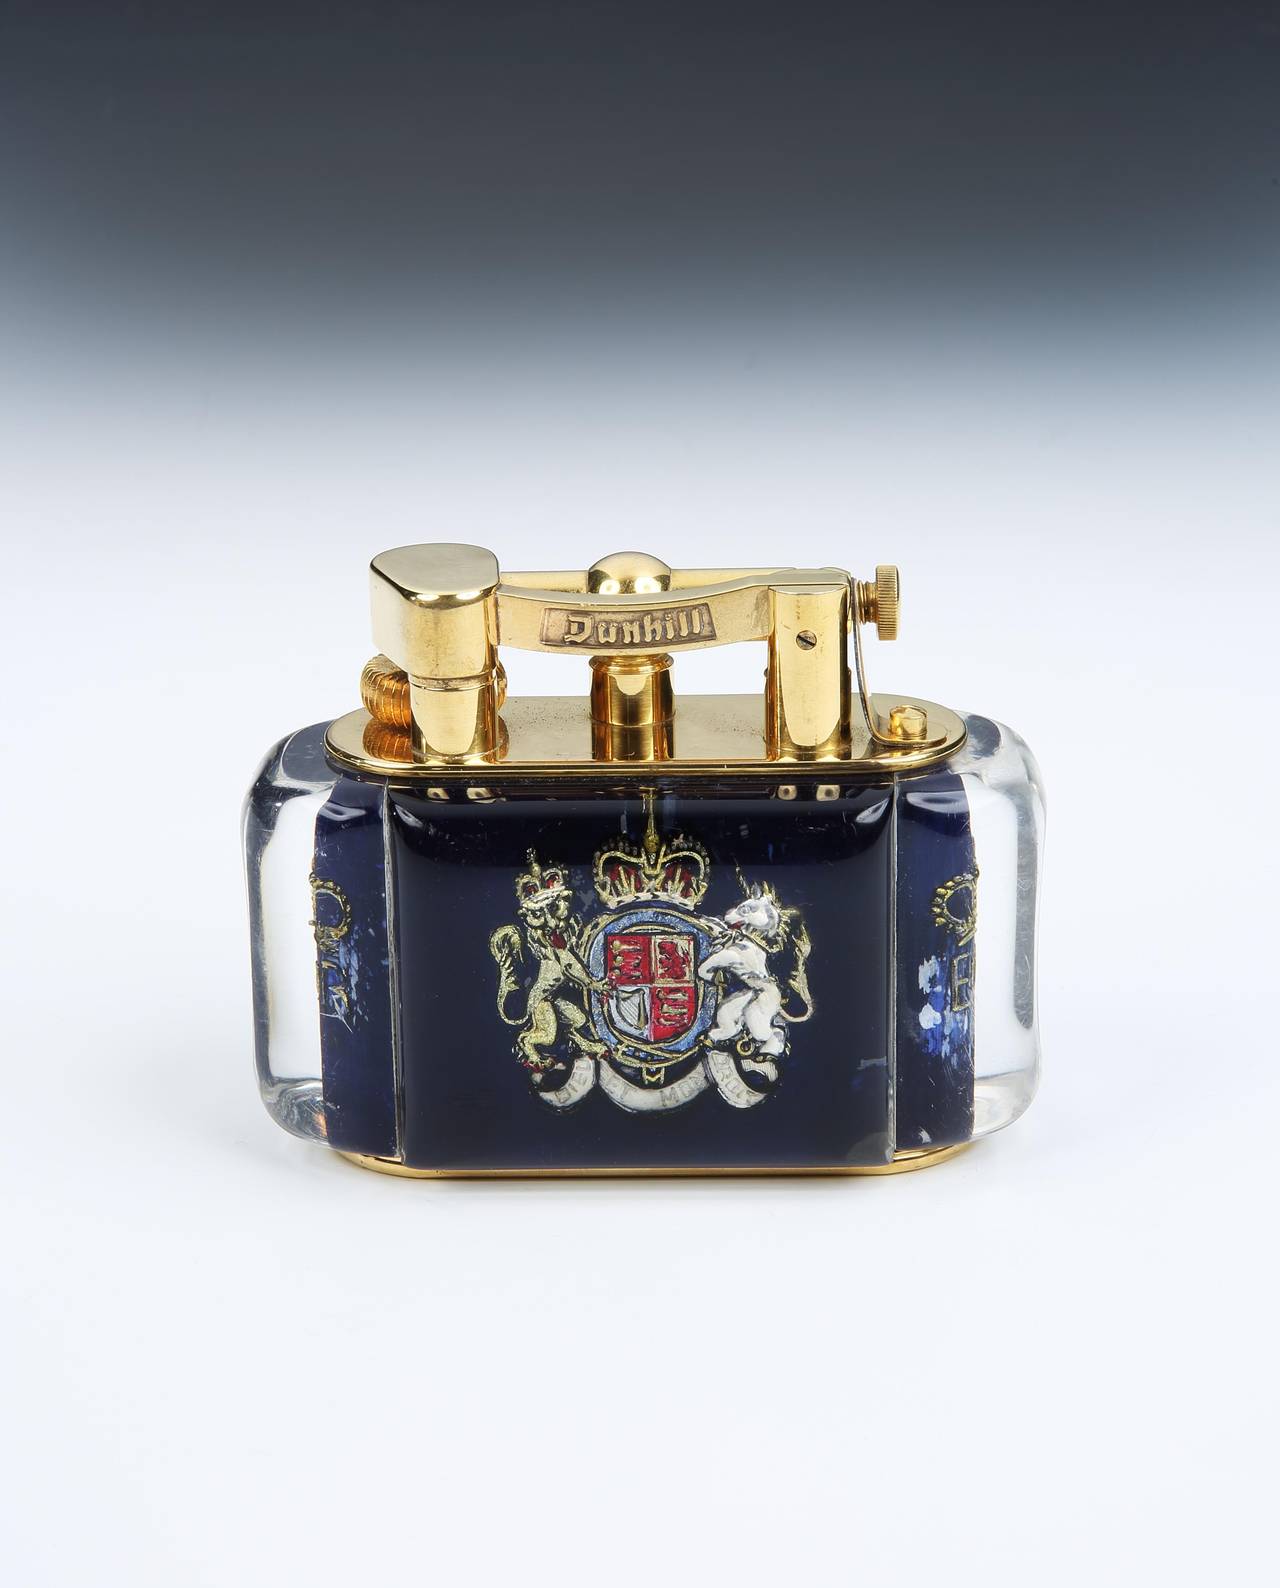 A very rare, and most likely unique gold-plated 'Aquarium' table lighter, the perspex body enclosing a hand-painted English Royal coat of arms to the front and reverse, using the highly skilled intaglio technique, where the design is built up in